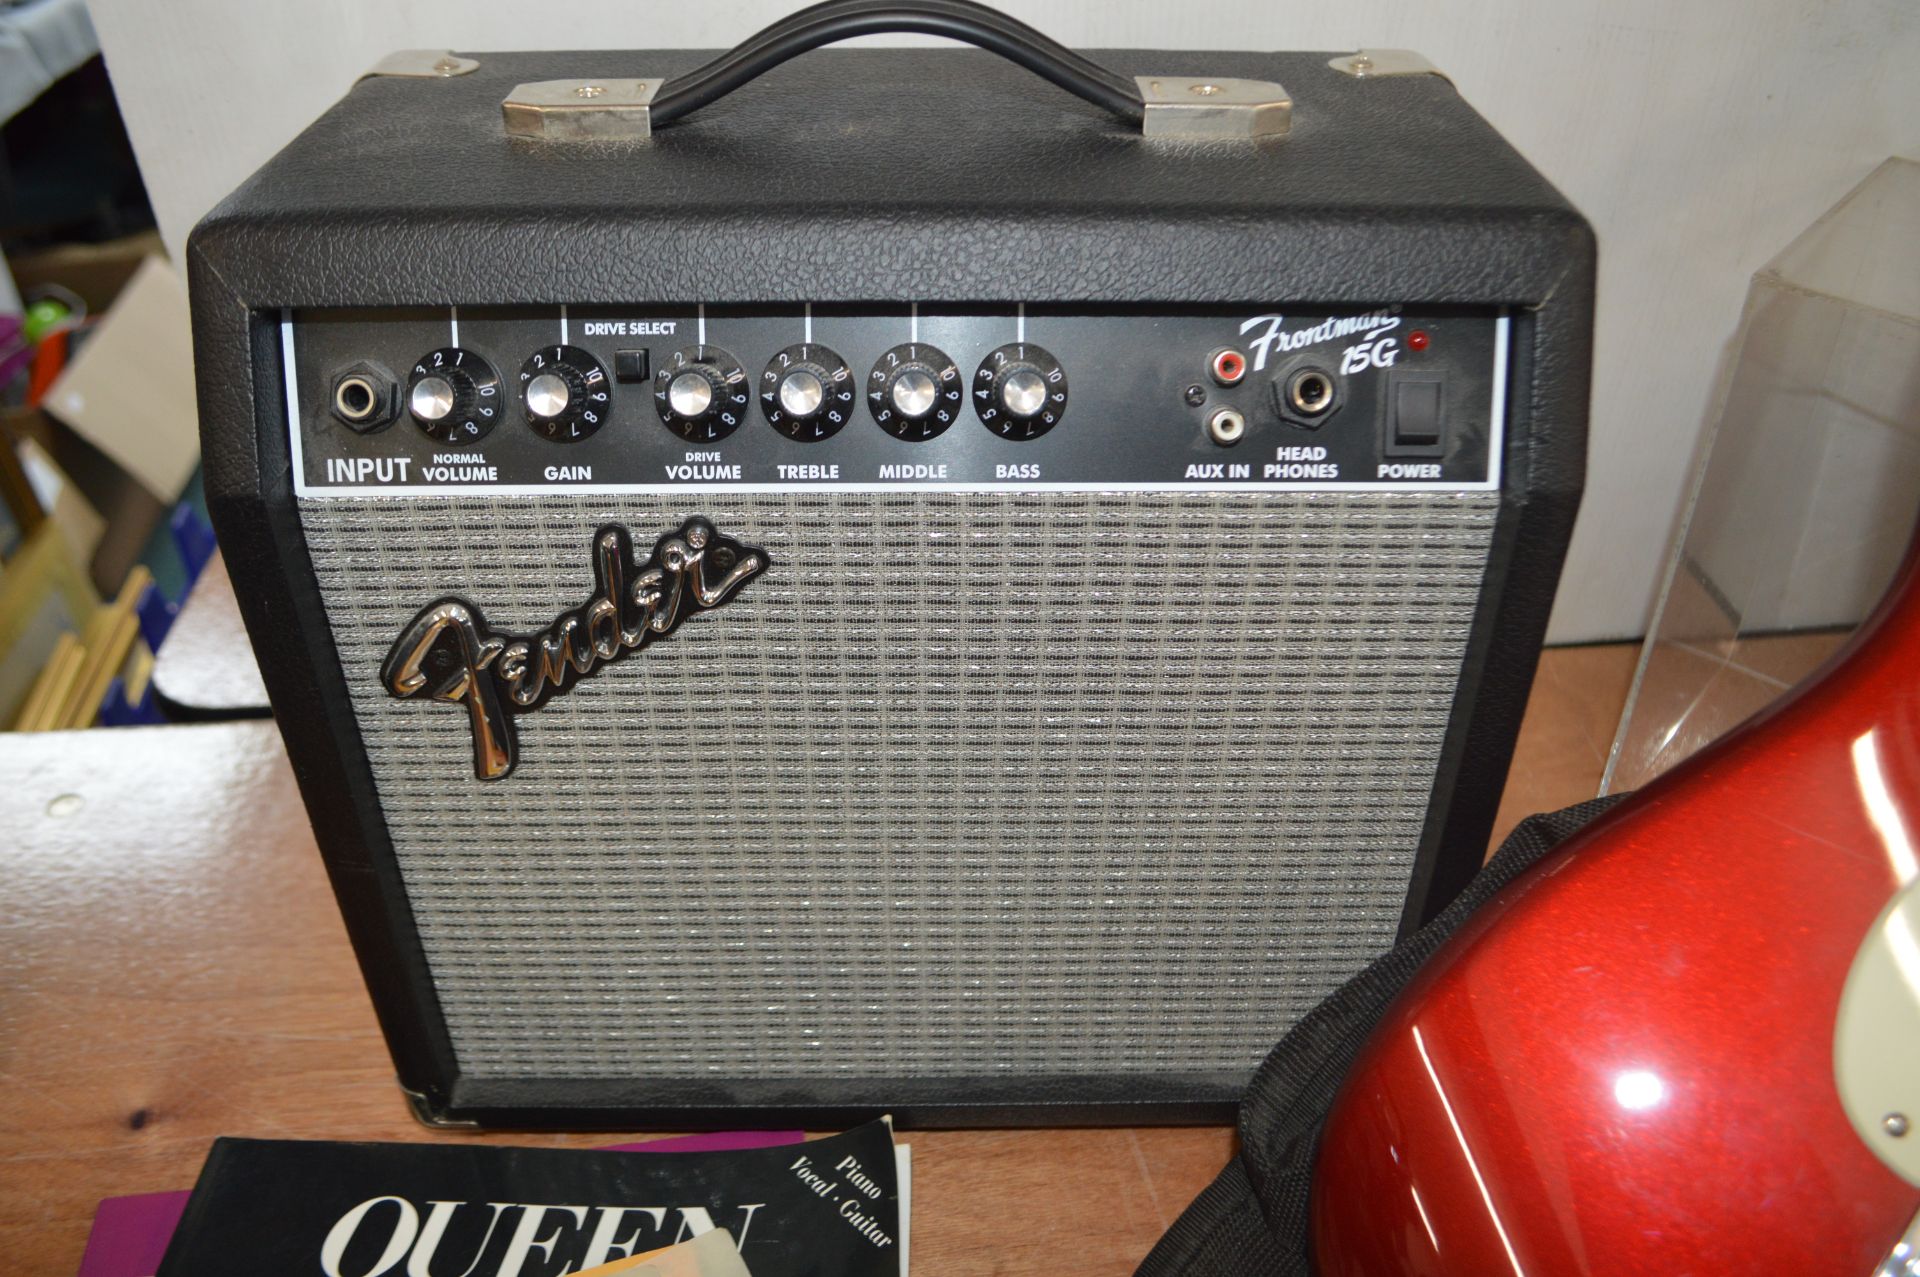 Fender Squier Stratocaster Electric Guitar plus Frontman 15G Amplifier, and Sing Books - Image 3 of 4